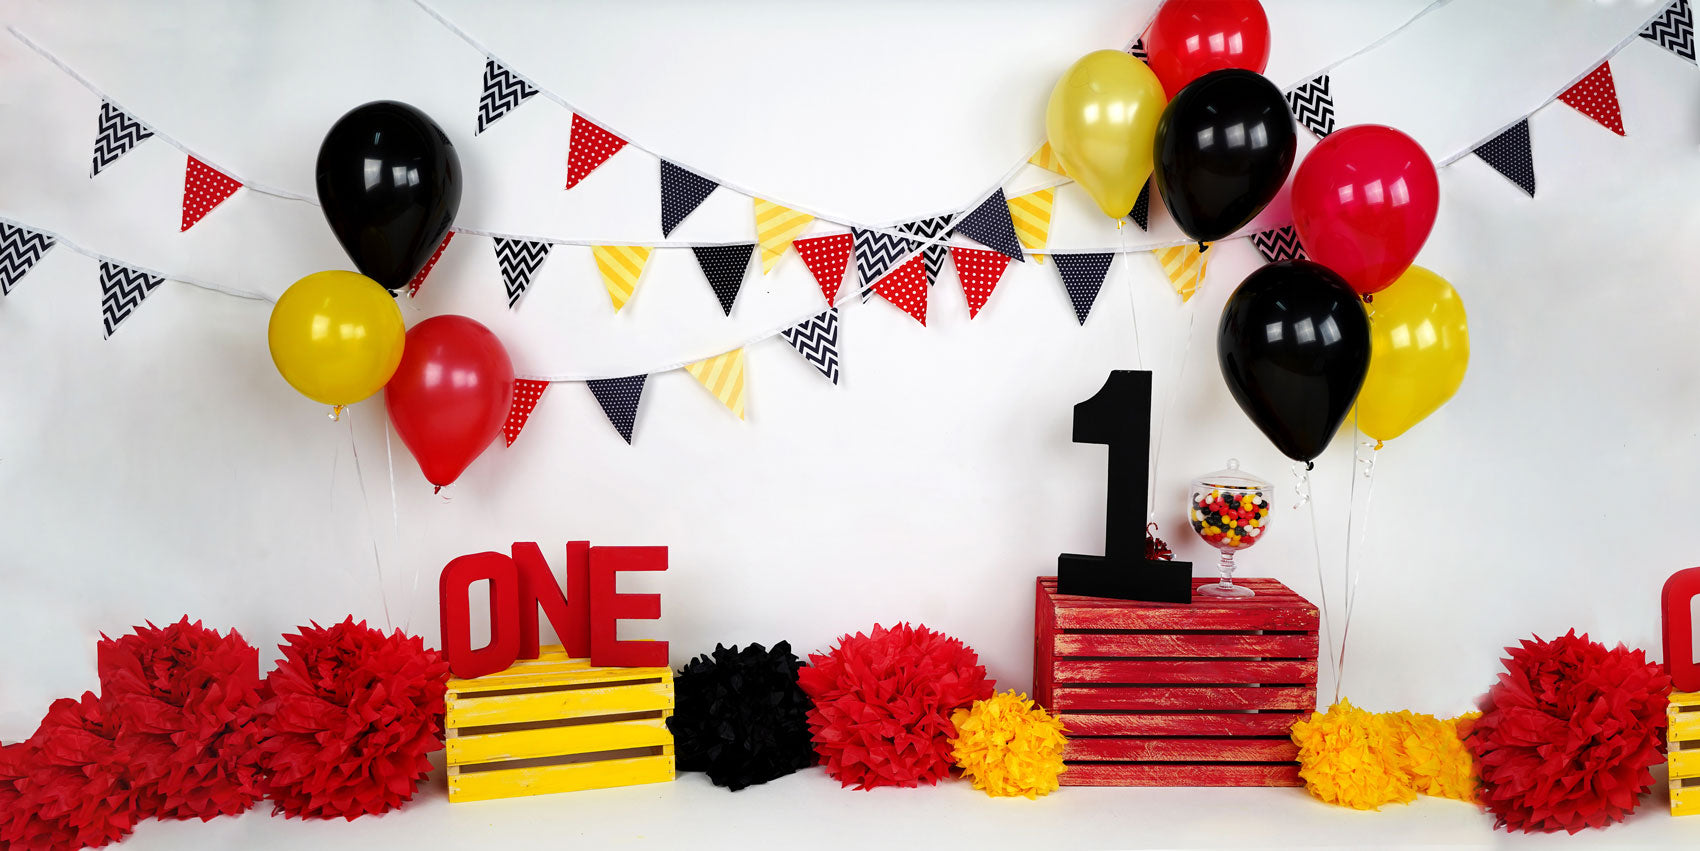 Kate Black Red Yellow Balloons 1st Birthday Backdrop Designed by Arica Kirby